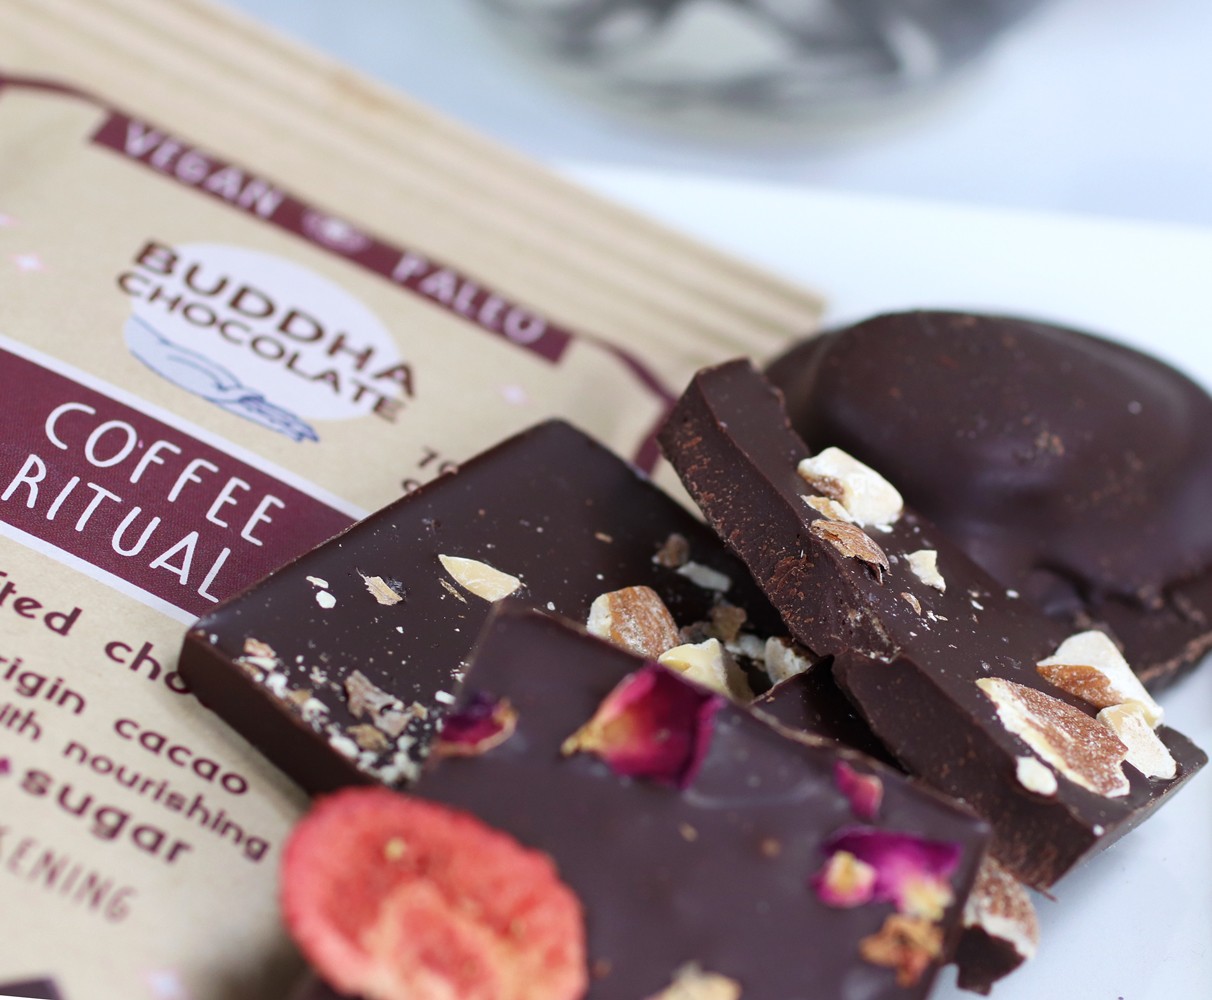 Buddha Chocolate is the BEST paleo and vegan chocolate ever - review by health blogger My Beauty Bunny